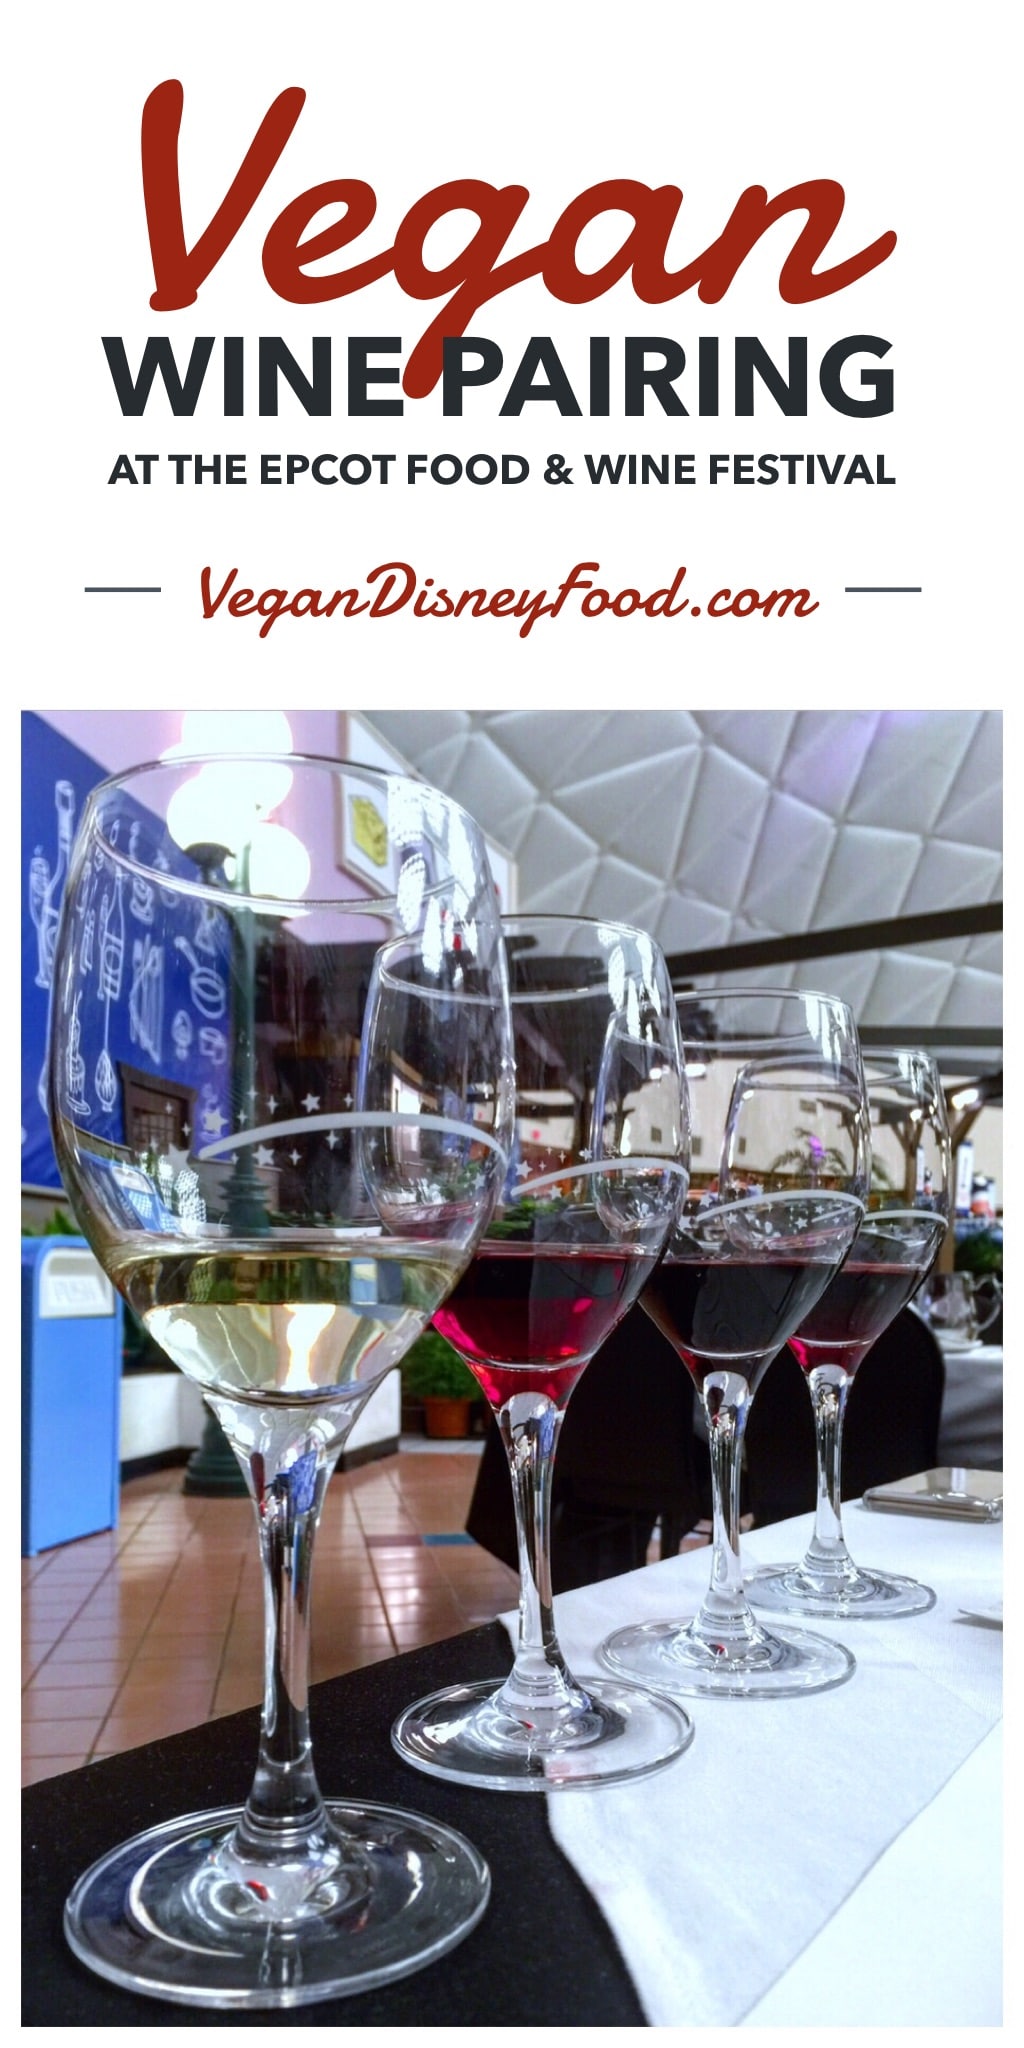 Vegan Wine Pairing Announced for the 2019 Epcot Food and Wine Festival at Walt Disney World